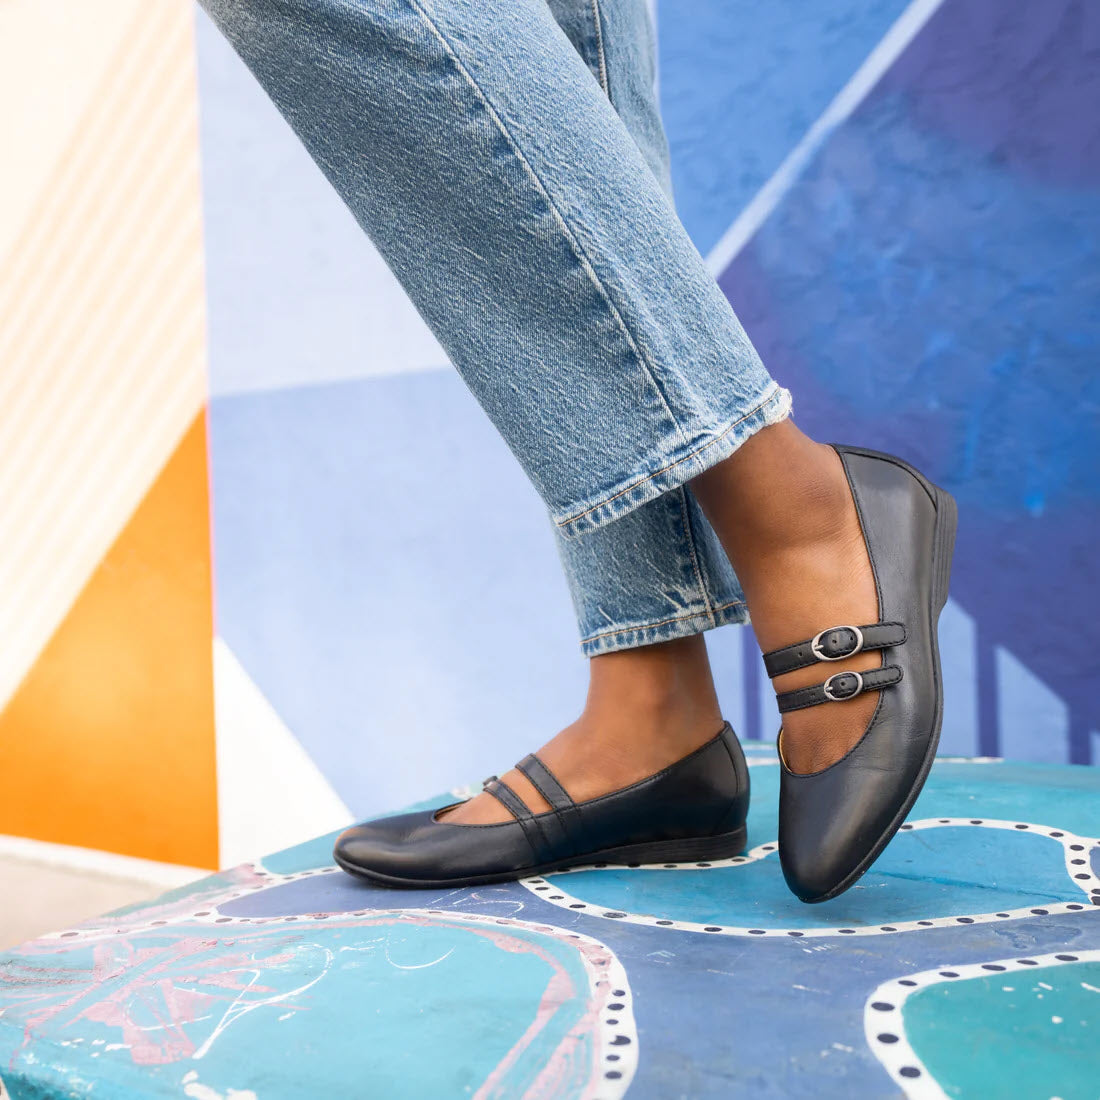 A person standing on a colorful, patterned surface wears cuffed denim jeans and elegant Dansko Leeza Black ballerina flats.